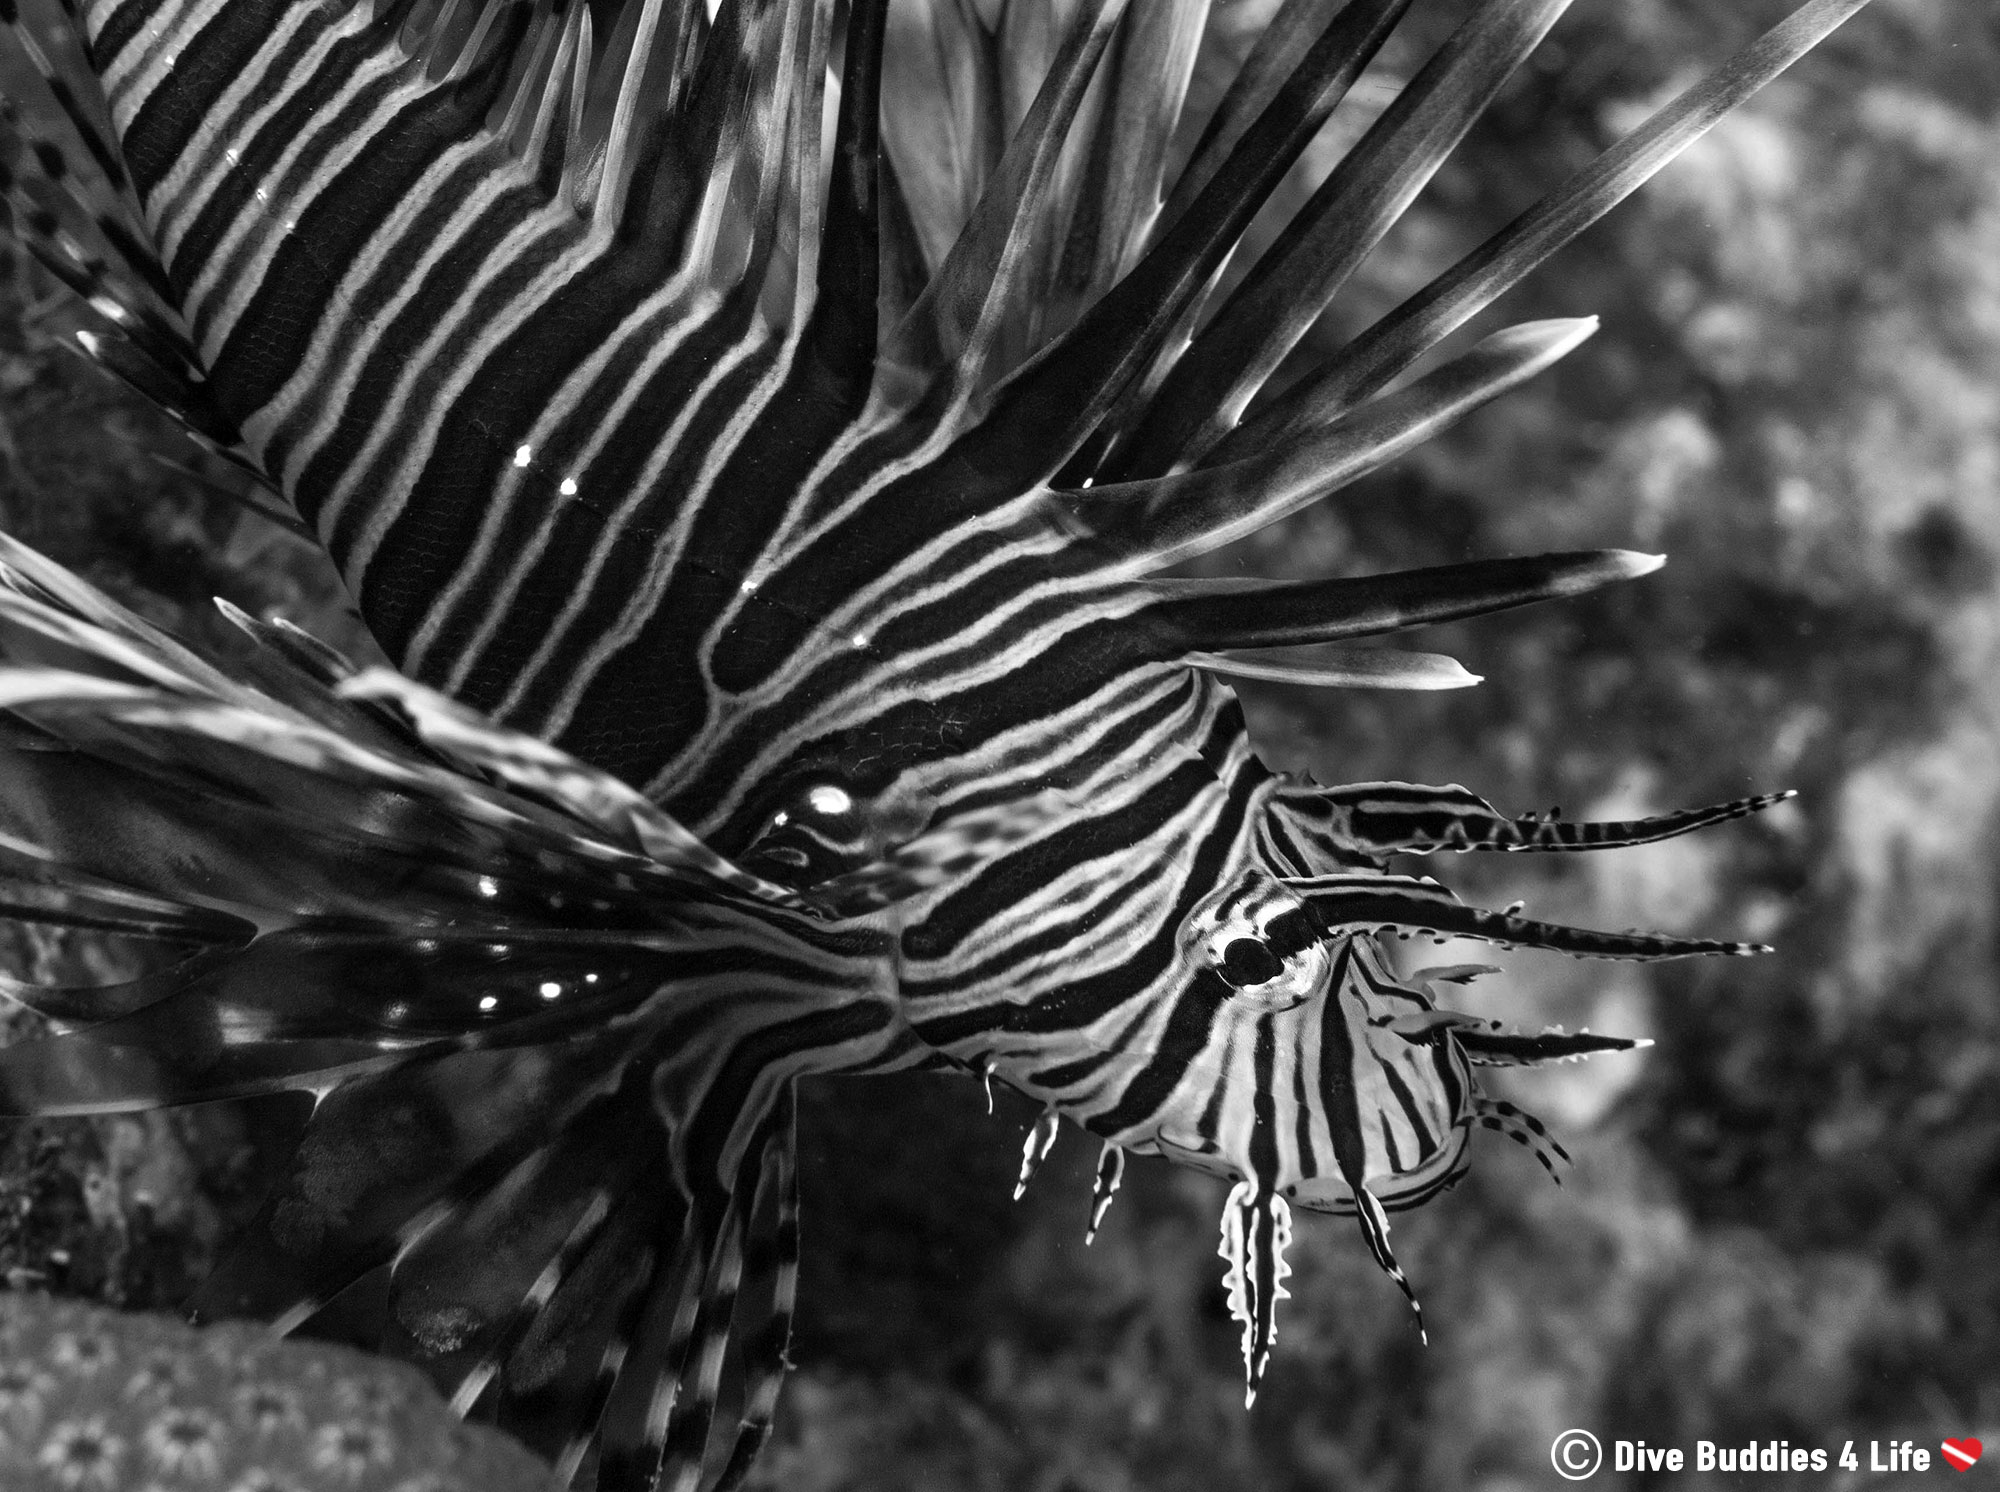 A Dangerous Lionfish that is a Problem for Conservation and for Caribbean Reefs